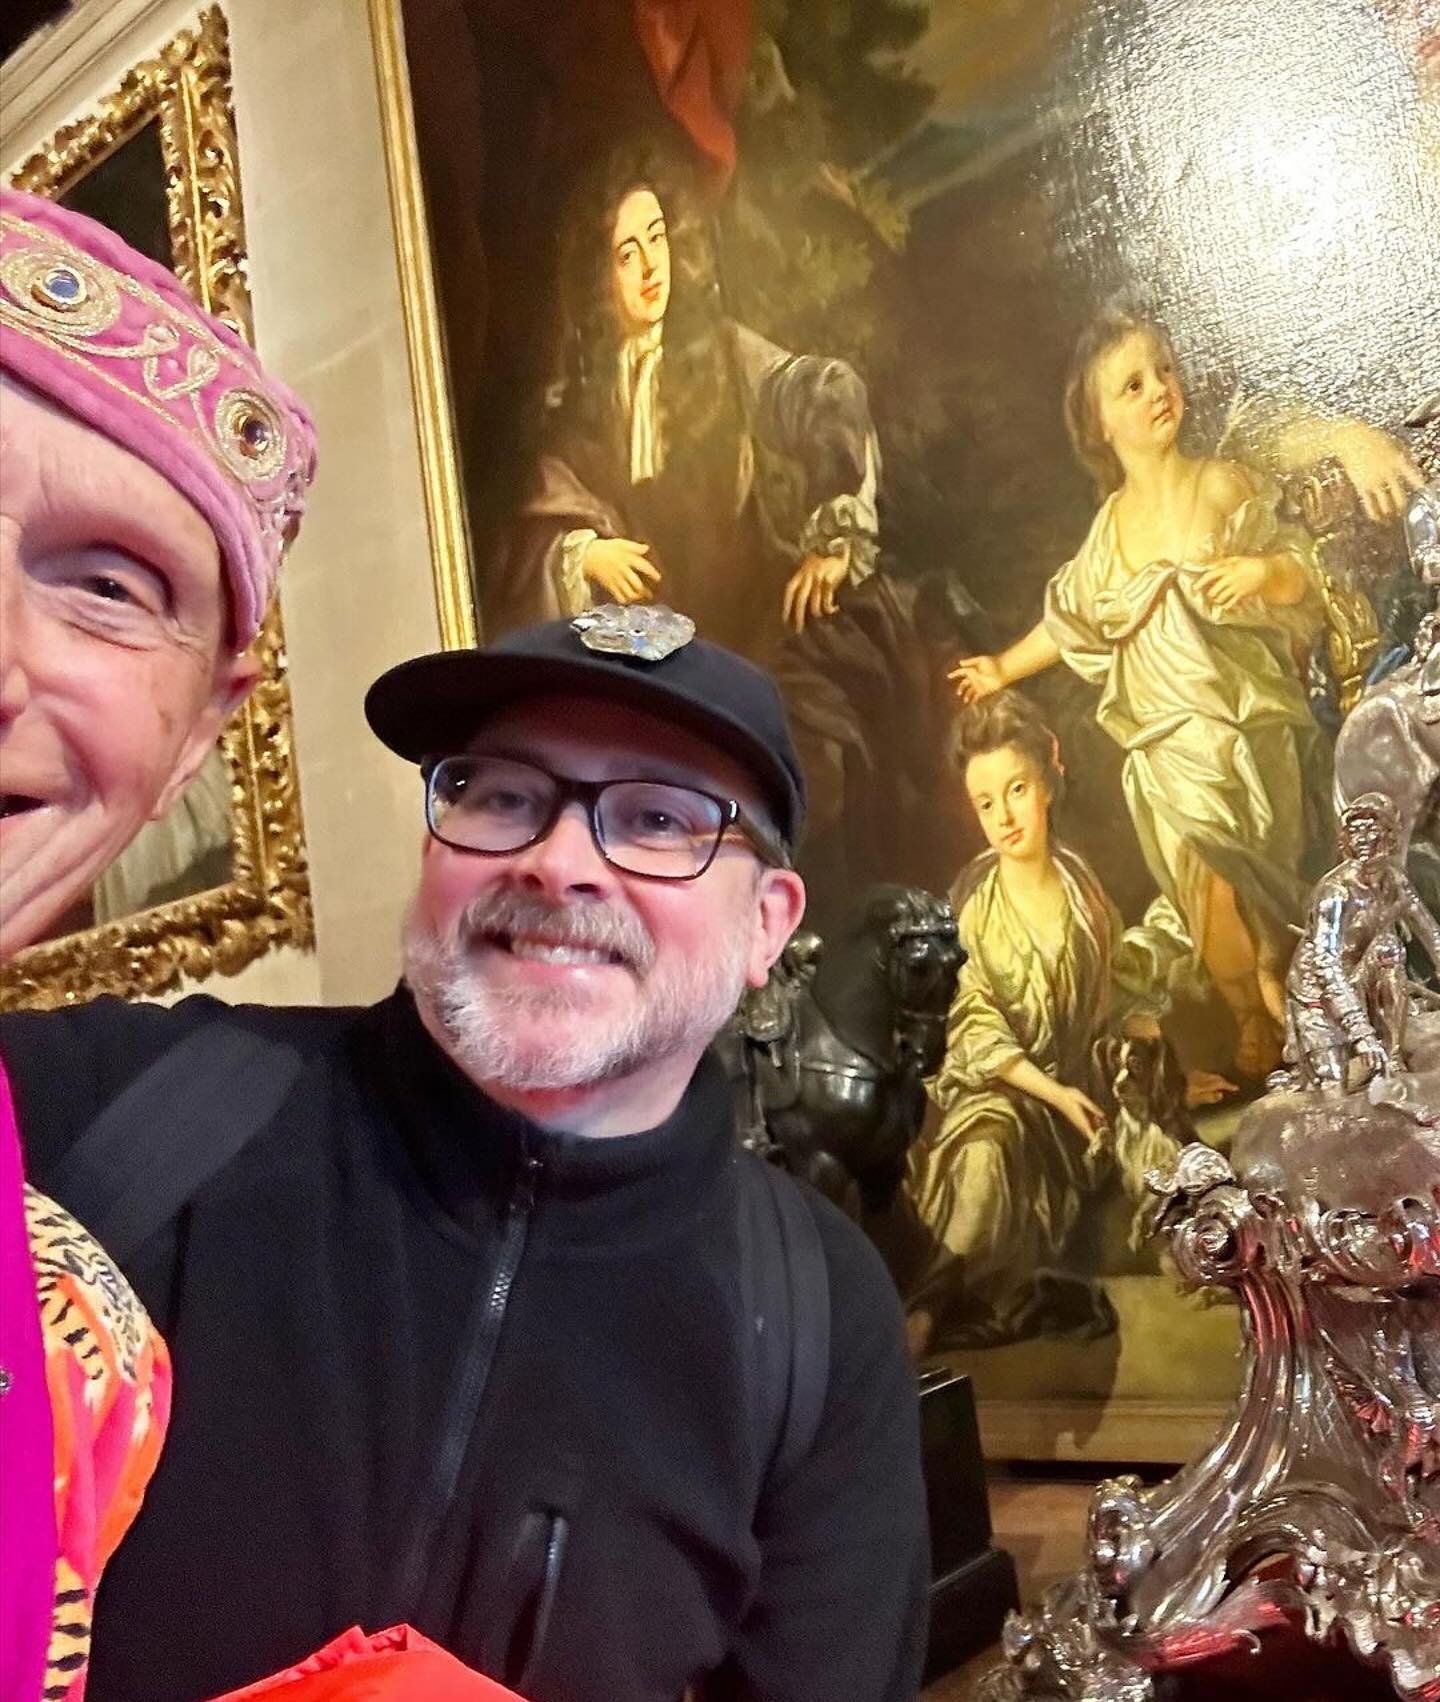 A selfie and visit to @blenheimpalace with @andrewlogansculptor for the @zandra_rhodes_ exhibition - open now and featuring Andrew&rsquo;s famous mirrored jewellery!

#adelrootstein mannequins kindly loaned by @fashion_museum_bath, mannequin wranglin